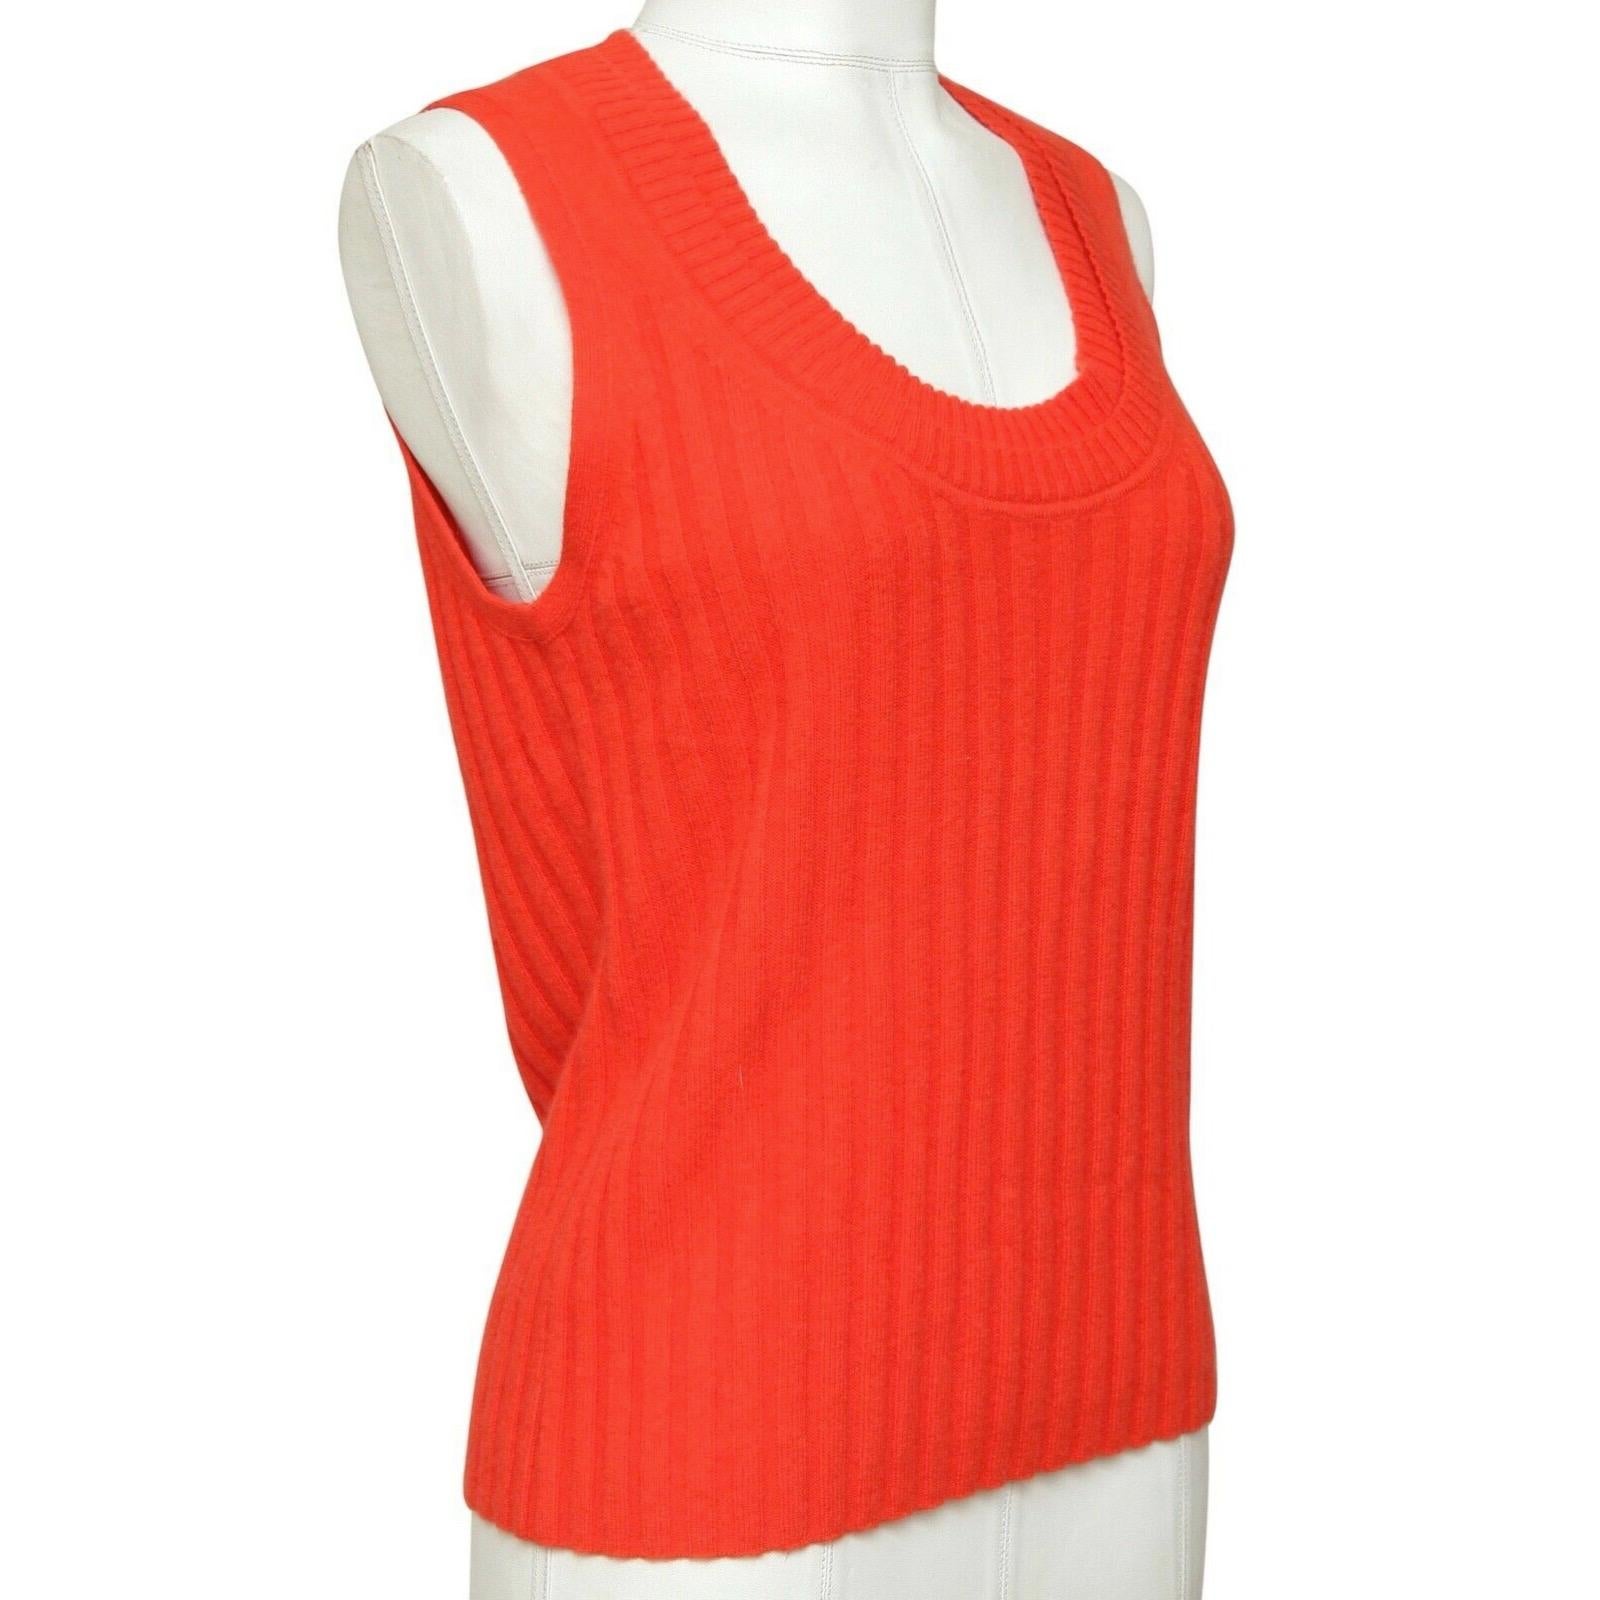 GUARANTEED AUTHENTIC ORANGE SLEEVELESS RIBBED SWEATER

Details:
- Lightweight orange ribbed sleeveless knit sweater.
- Crew neck.
- Easy and year round great piece for your 3.1 Phillip Lim collection.

Size: L

Fabric: 98% Cashmere, 1% Polyamide, 1%